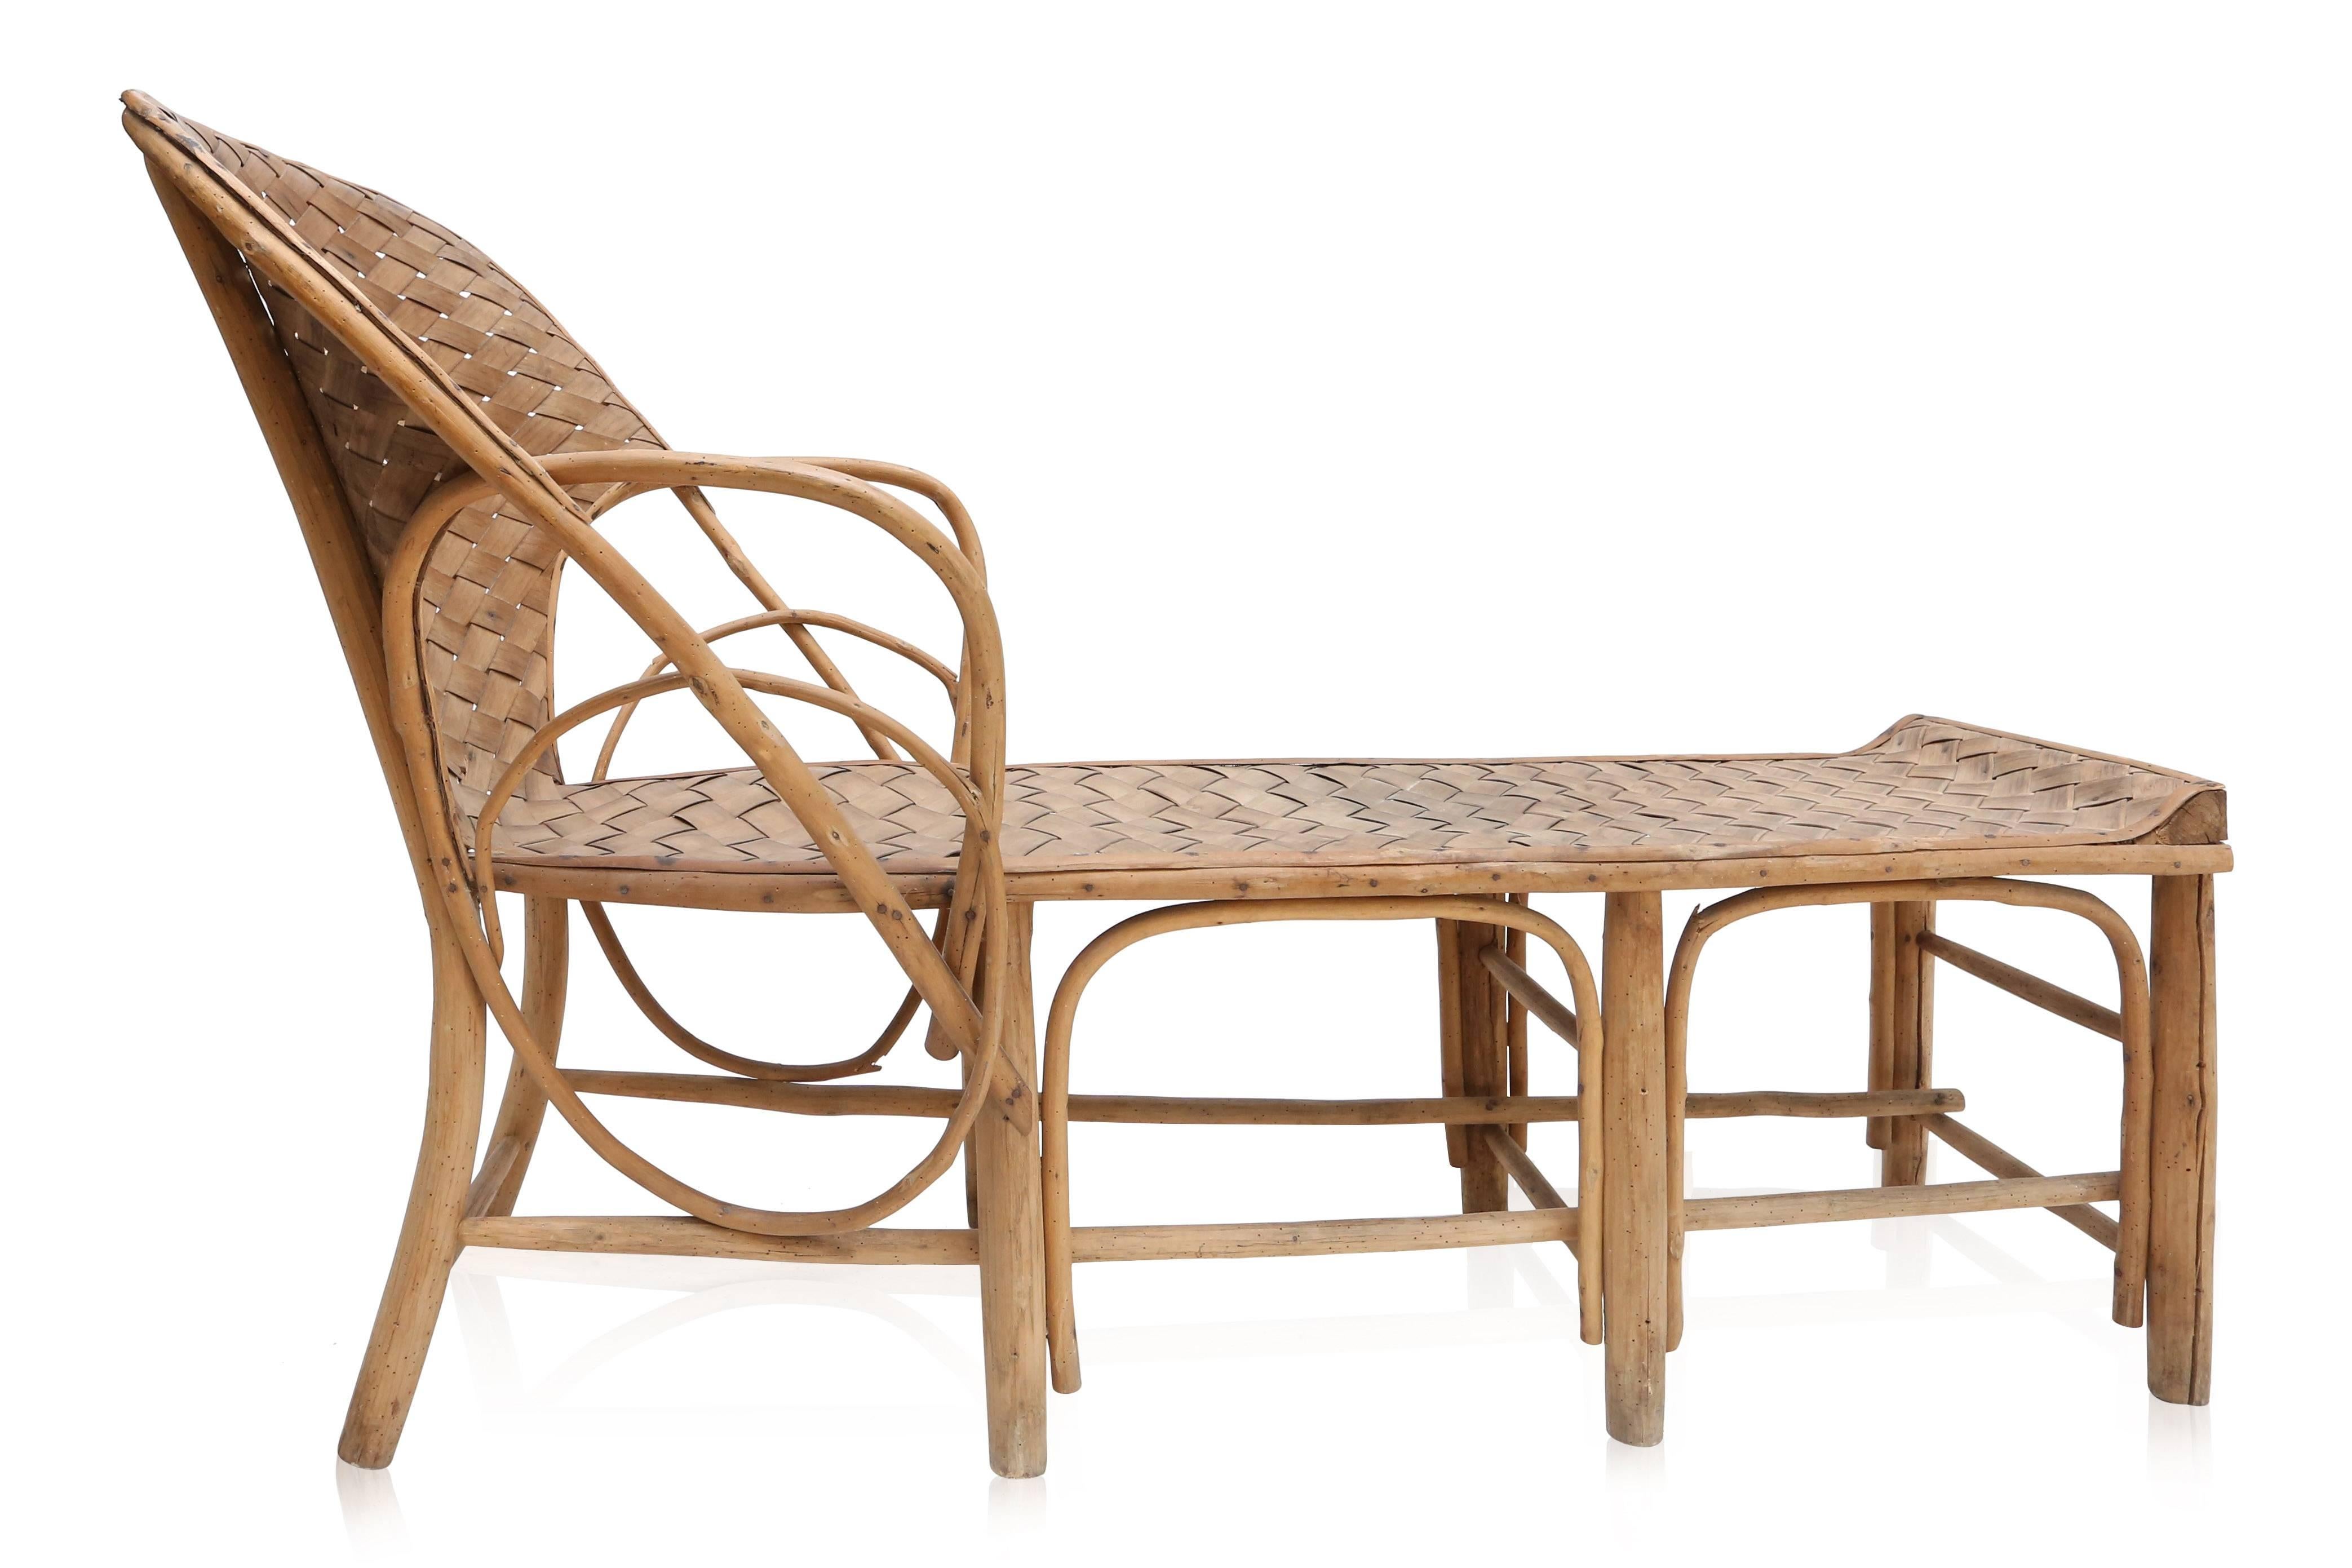 Mid-century modern weaved Rattan lounge chair.
French Provincial, circa 1960s.
Would fit well in a wabi sabi minimalist zen inspired Axel Vervoordt interior
Measure: L 143 cm H 90 cm SH 44 cm W 60 cm.